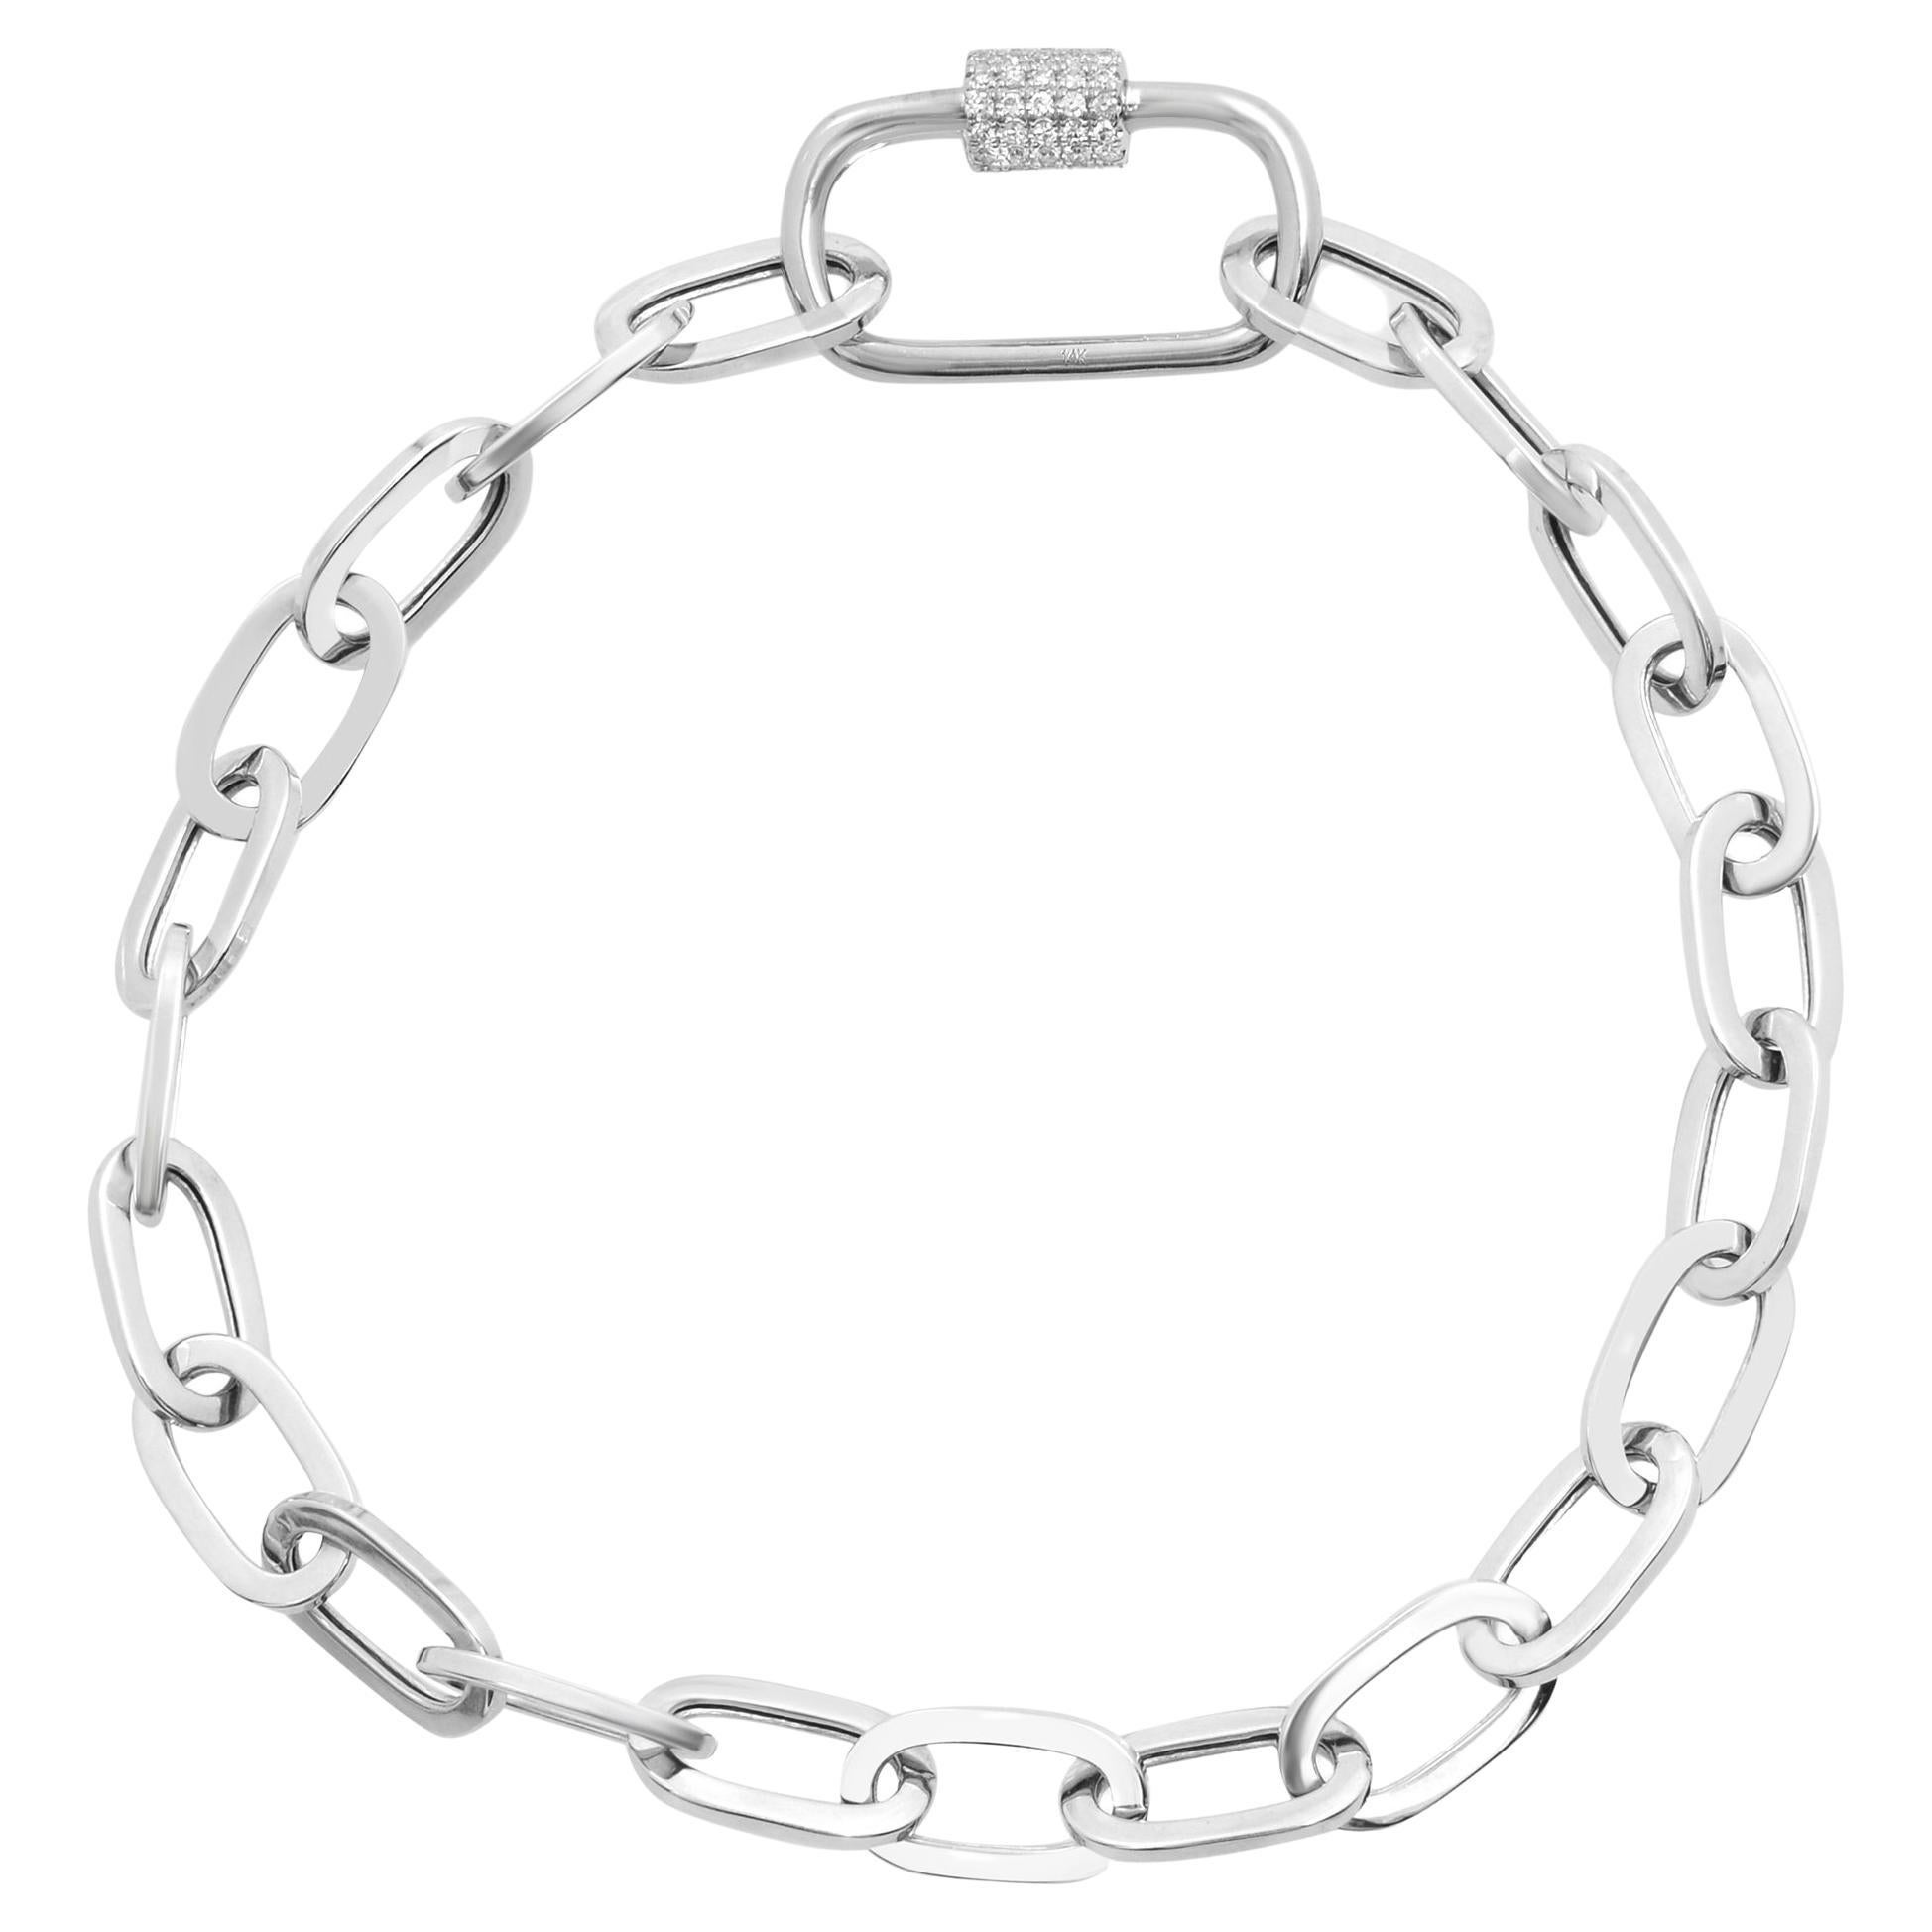 Get the perfect complementary everyday look with this weightless paperclip bracelet crafted in high polish 14K white gold. It's stackable and easy to mix and match. This bracelet features paper clip links measuring 9.7mm x 5.5mm each with pave set